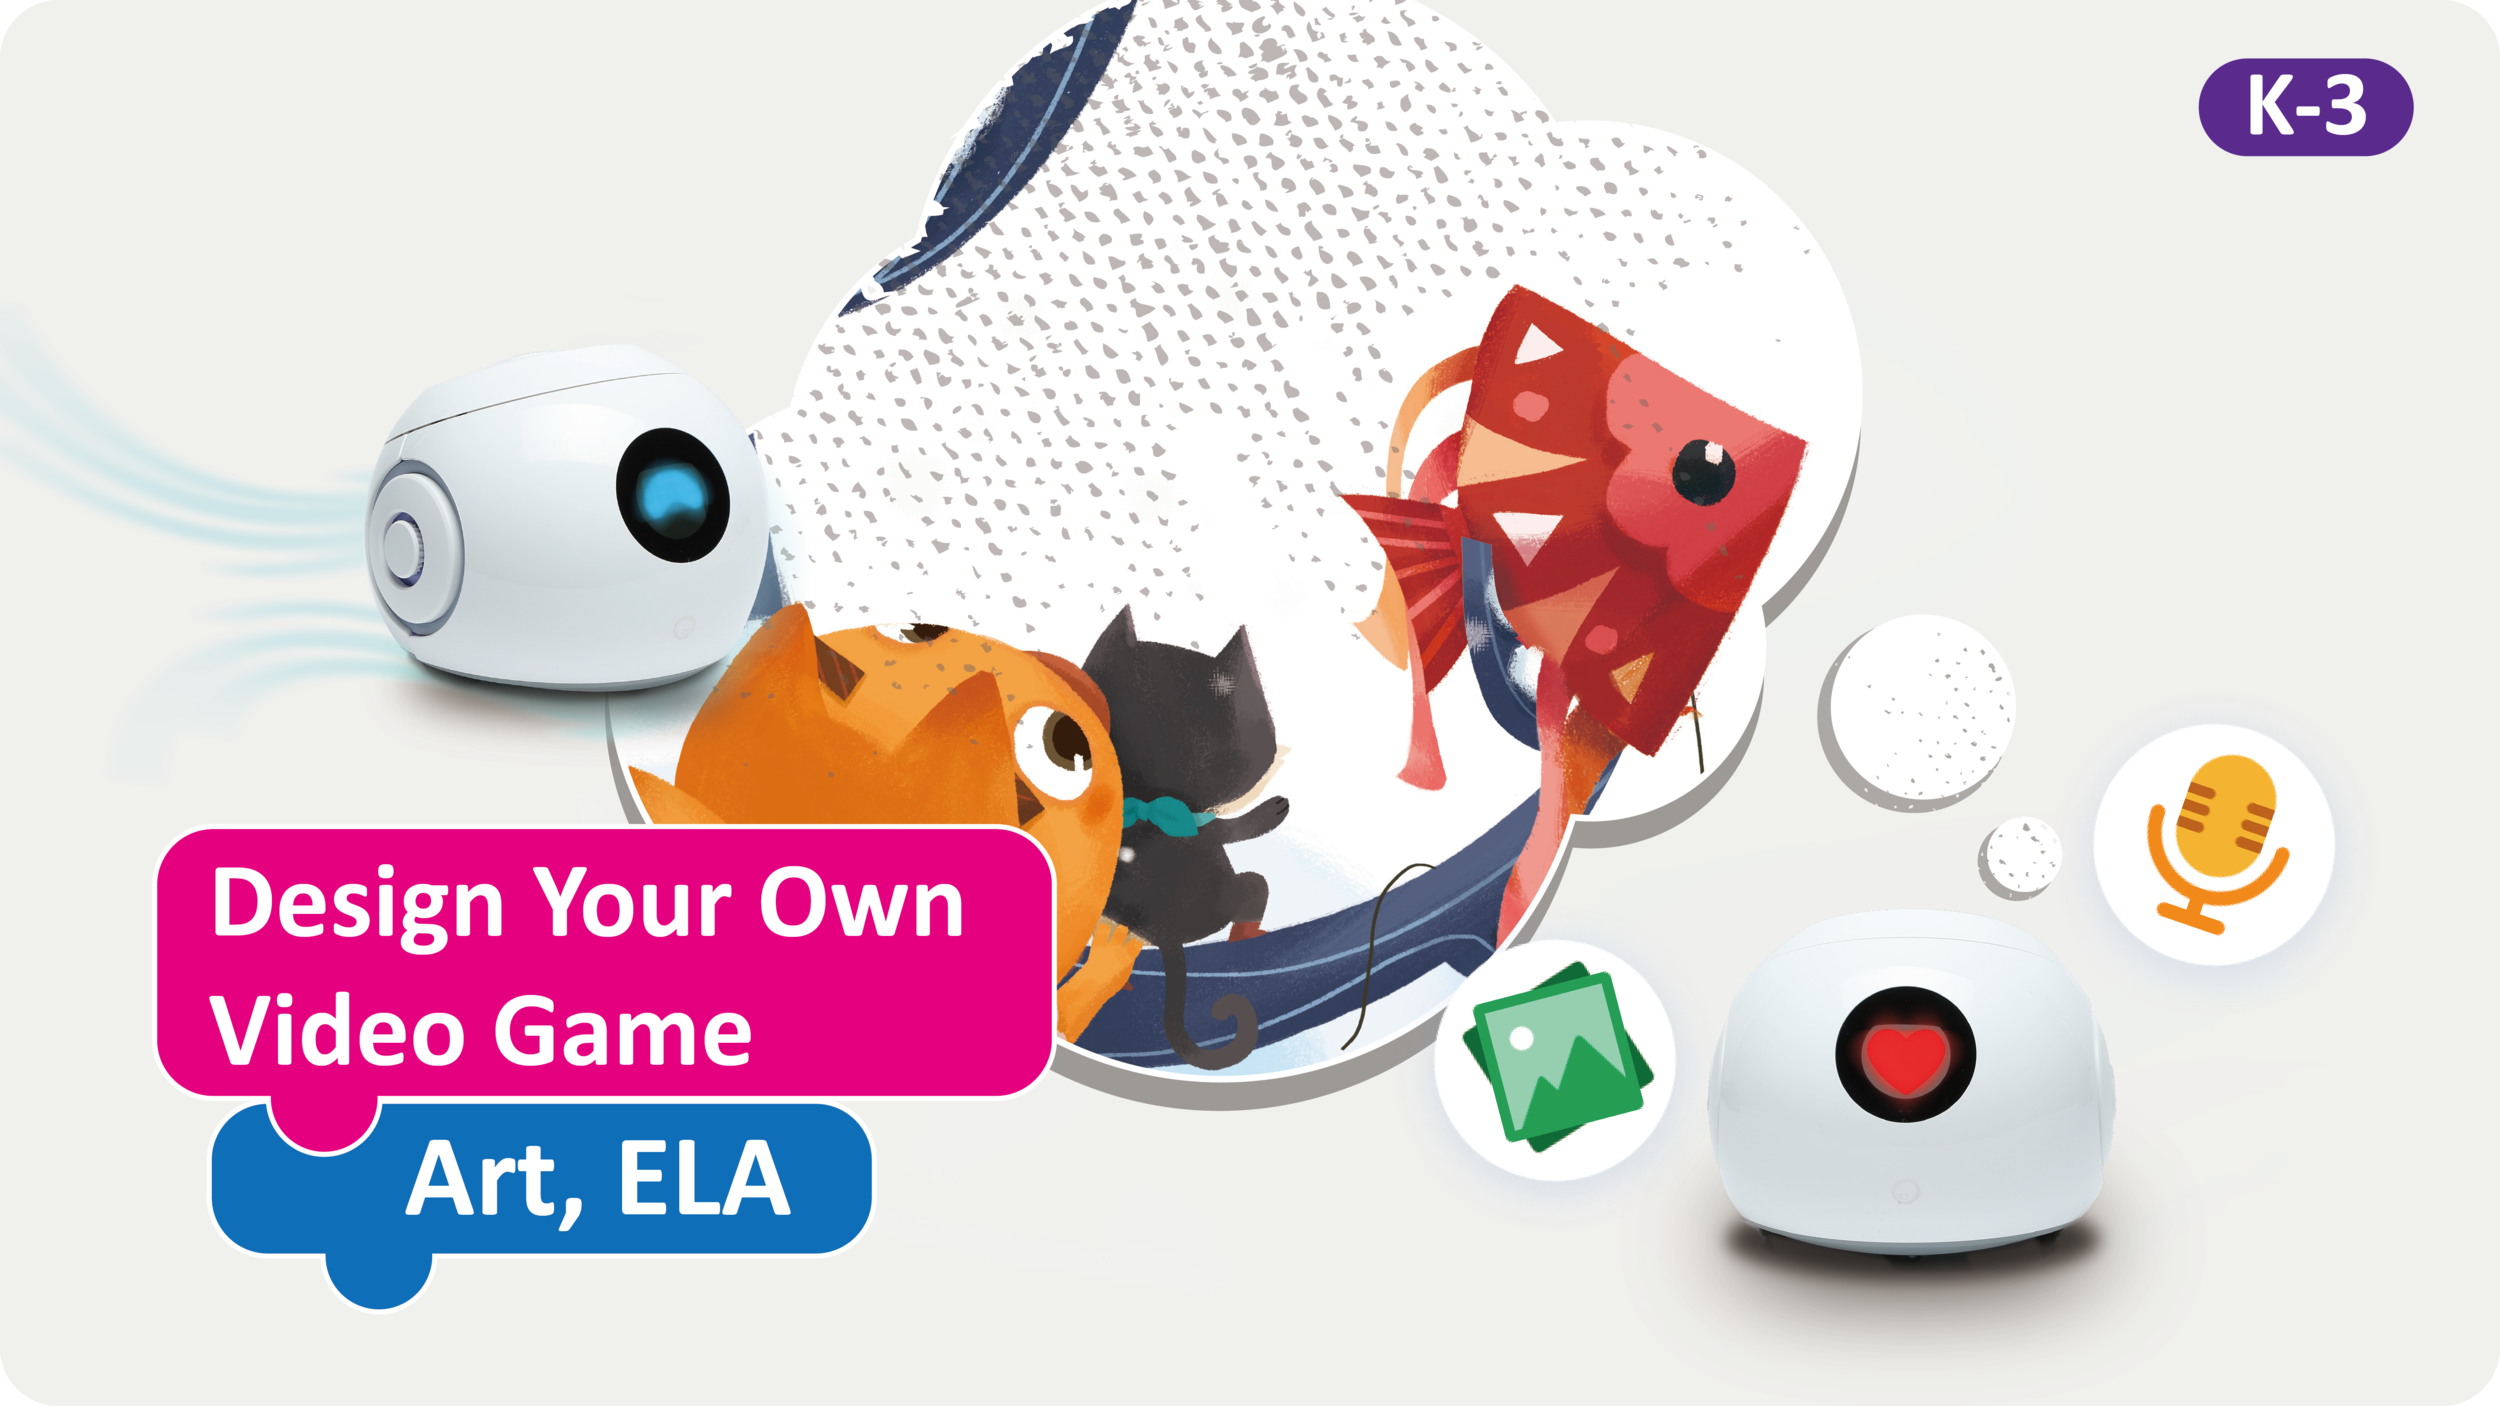 Design Your Own Video Game